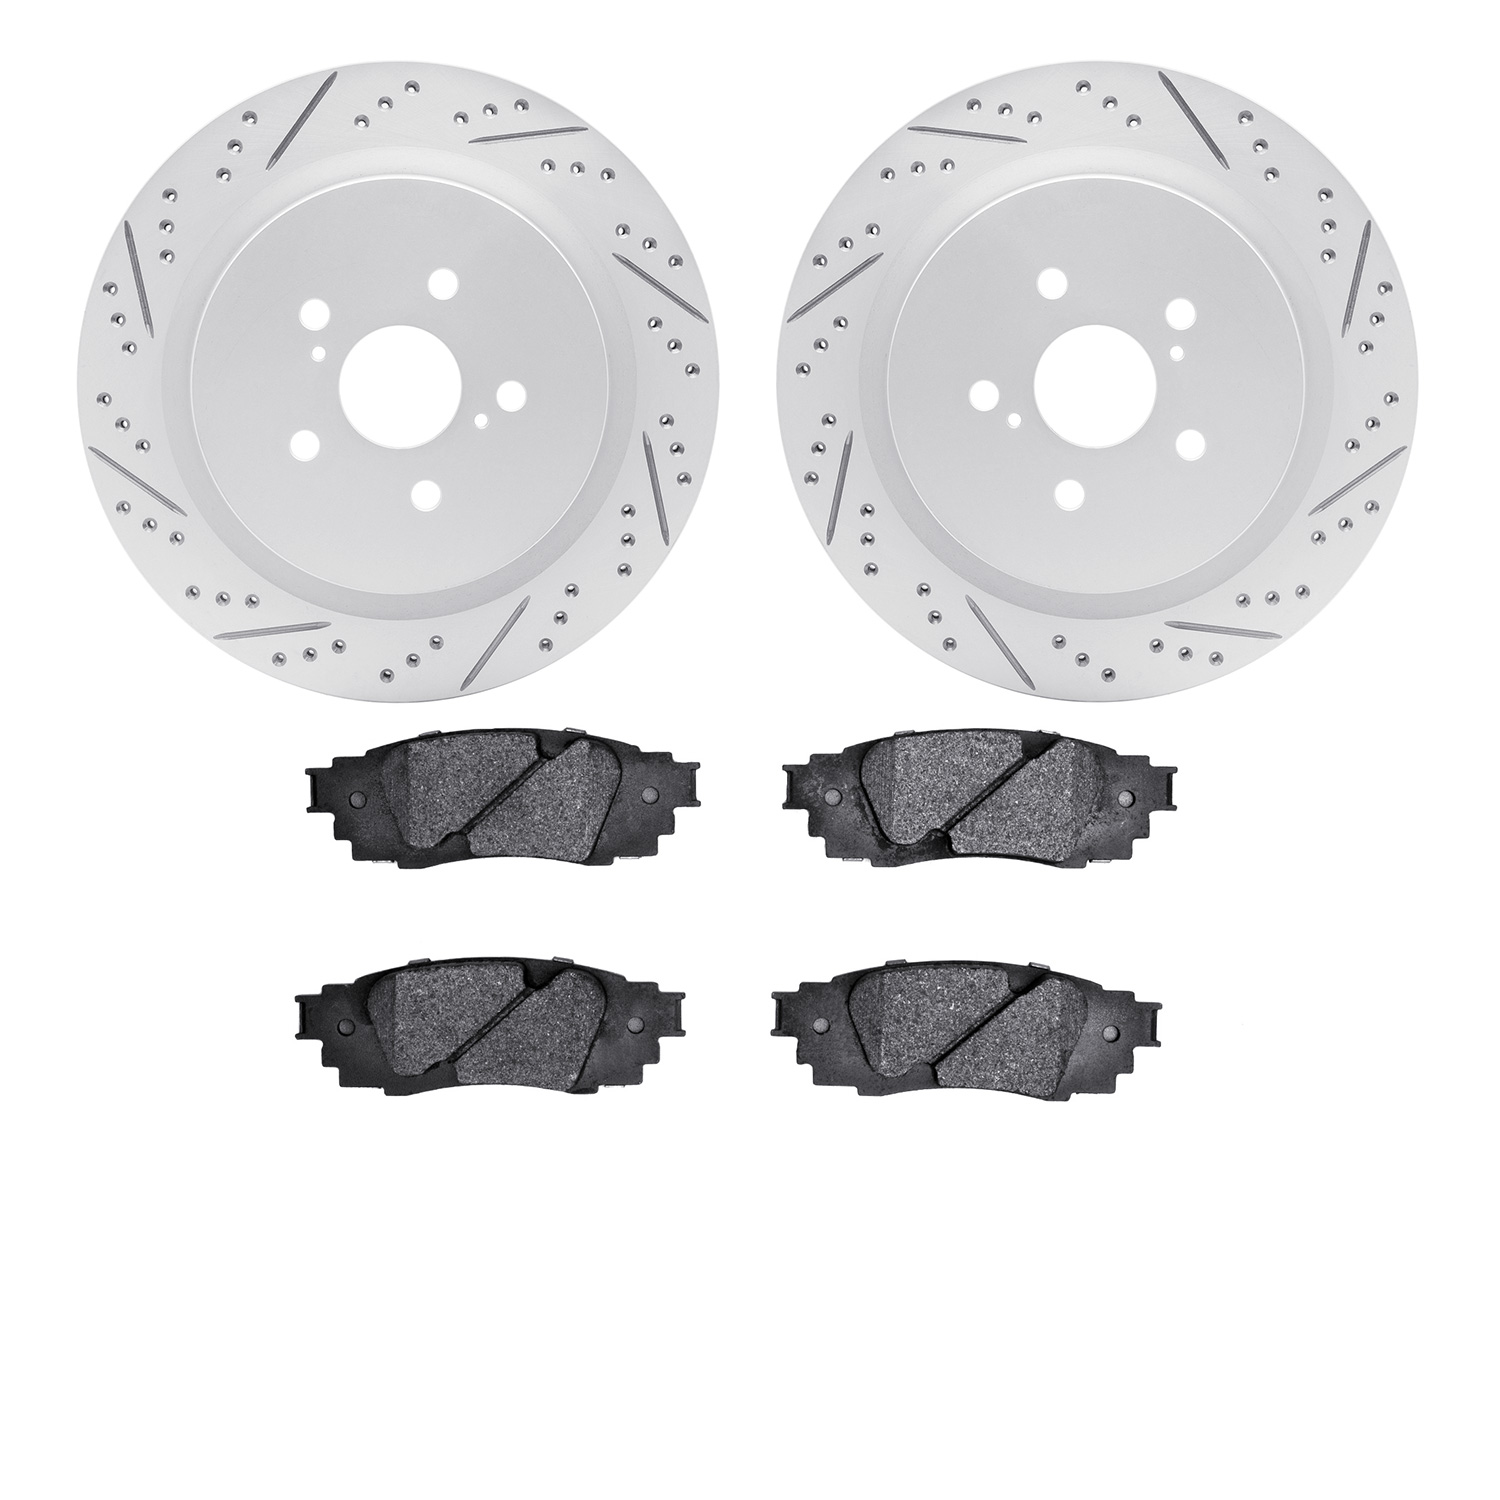 2502-75038 Geoperformance Drilled/Slotted Rotors w/5000 Advanced Brake Pads Kit, Fits Select Lexus/Toyota/Scion, Position: Rear